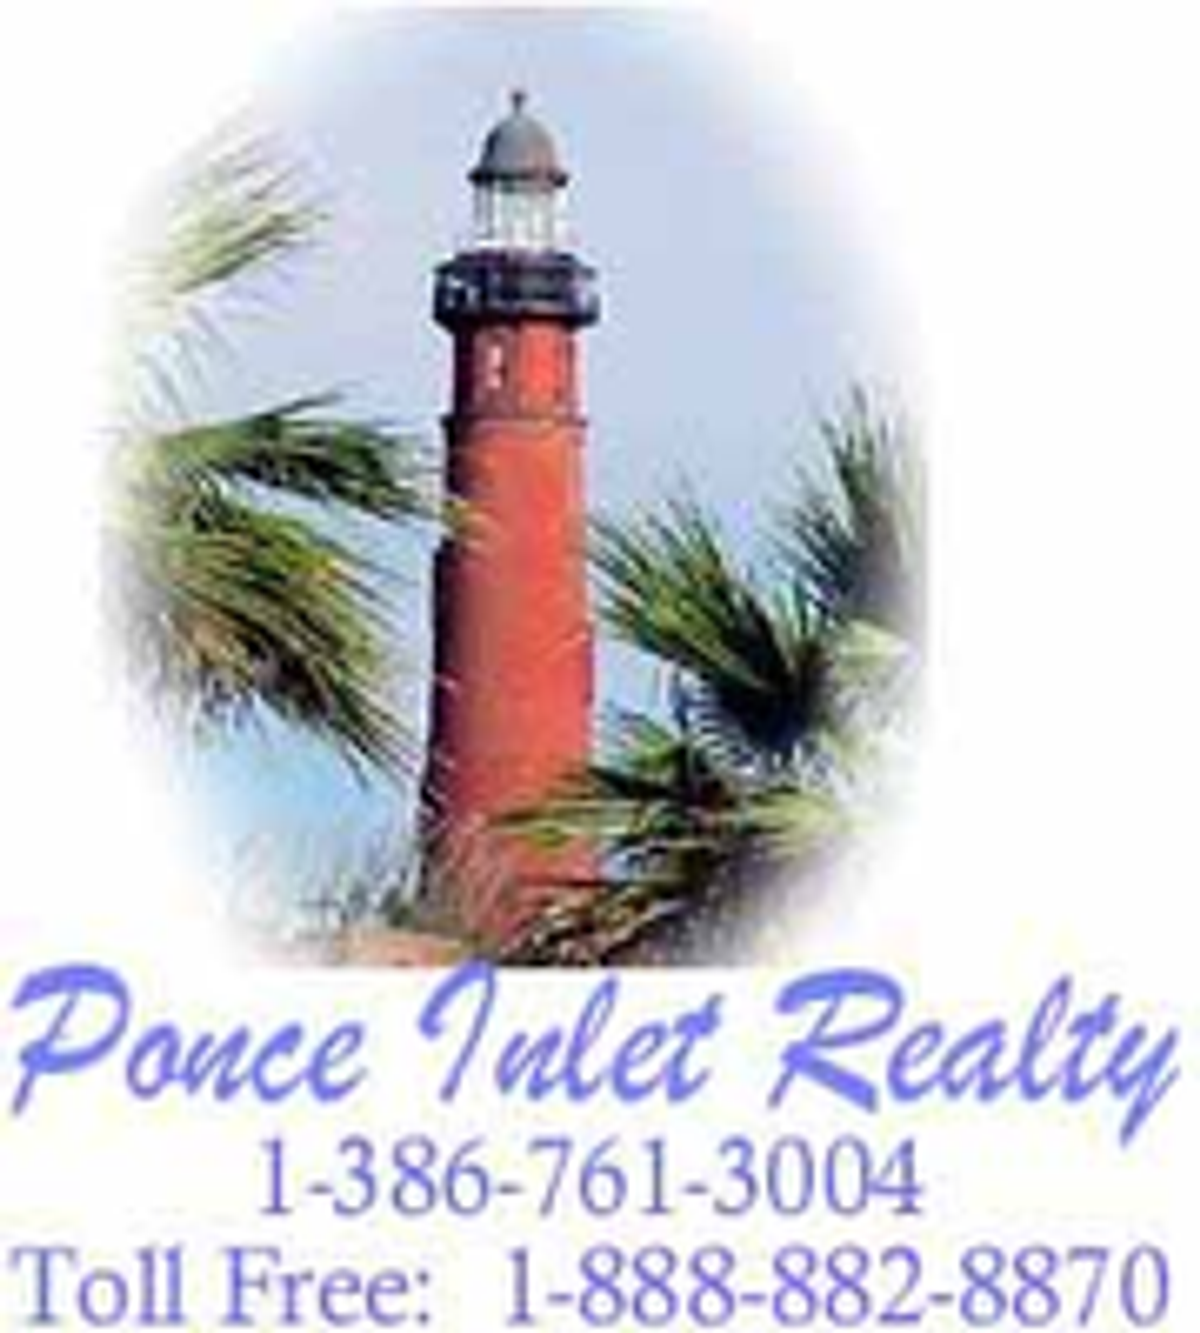 Photo for Diane Filardo, Listing Agent at Ponce Inlet Realty, Inc